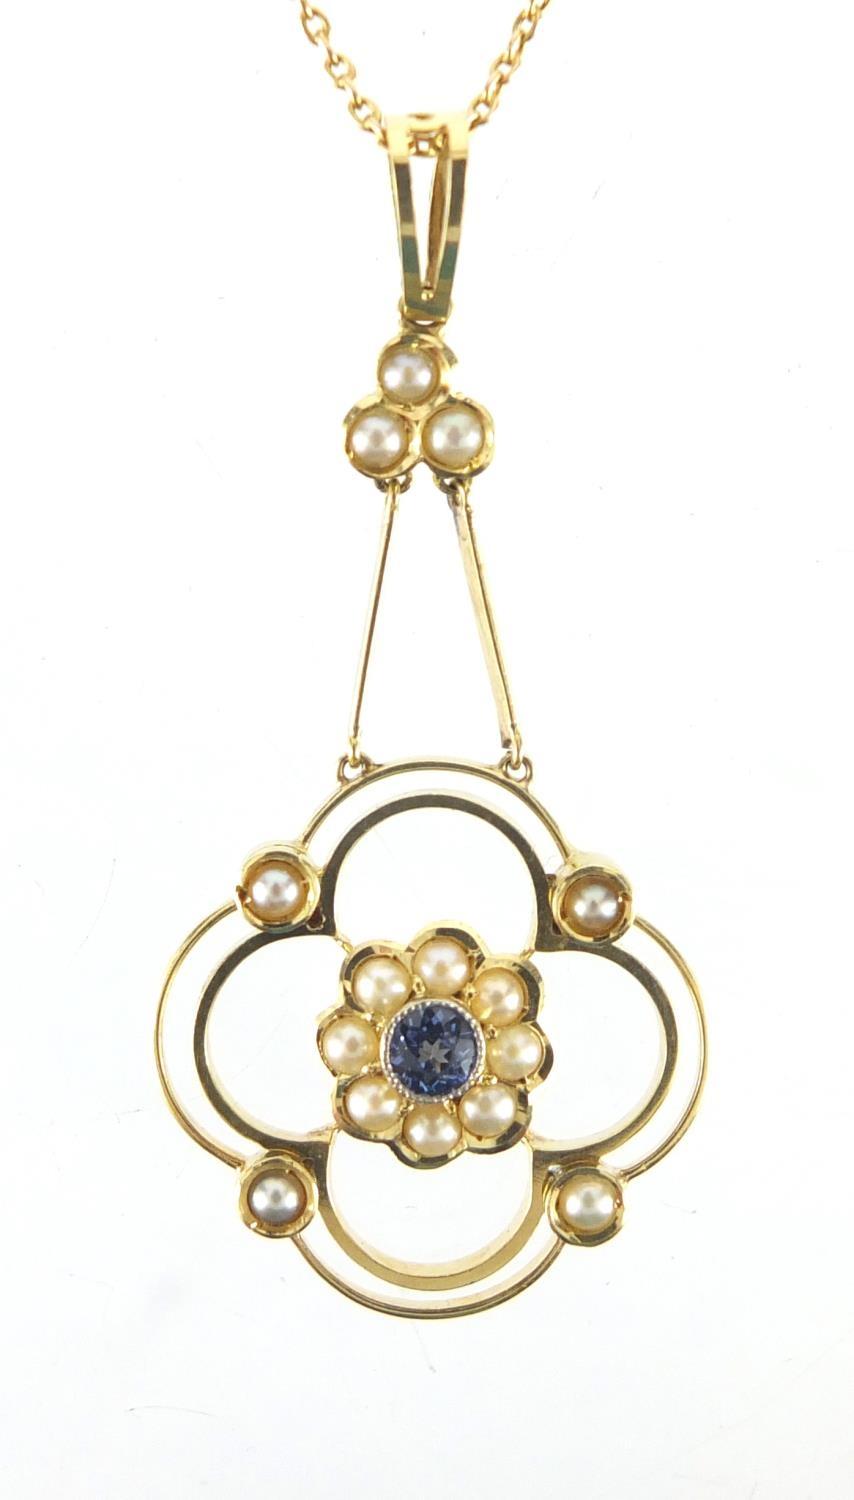 Art Nouveau 15ct gold seed pearl and blue stone pendant, on a 9ct gold necklace, the pendant 4.5cm